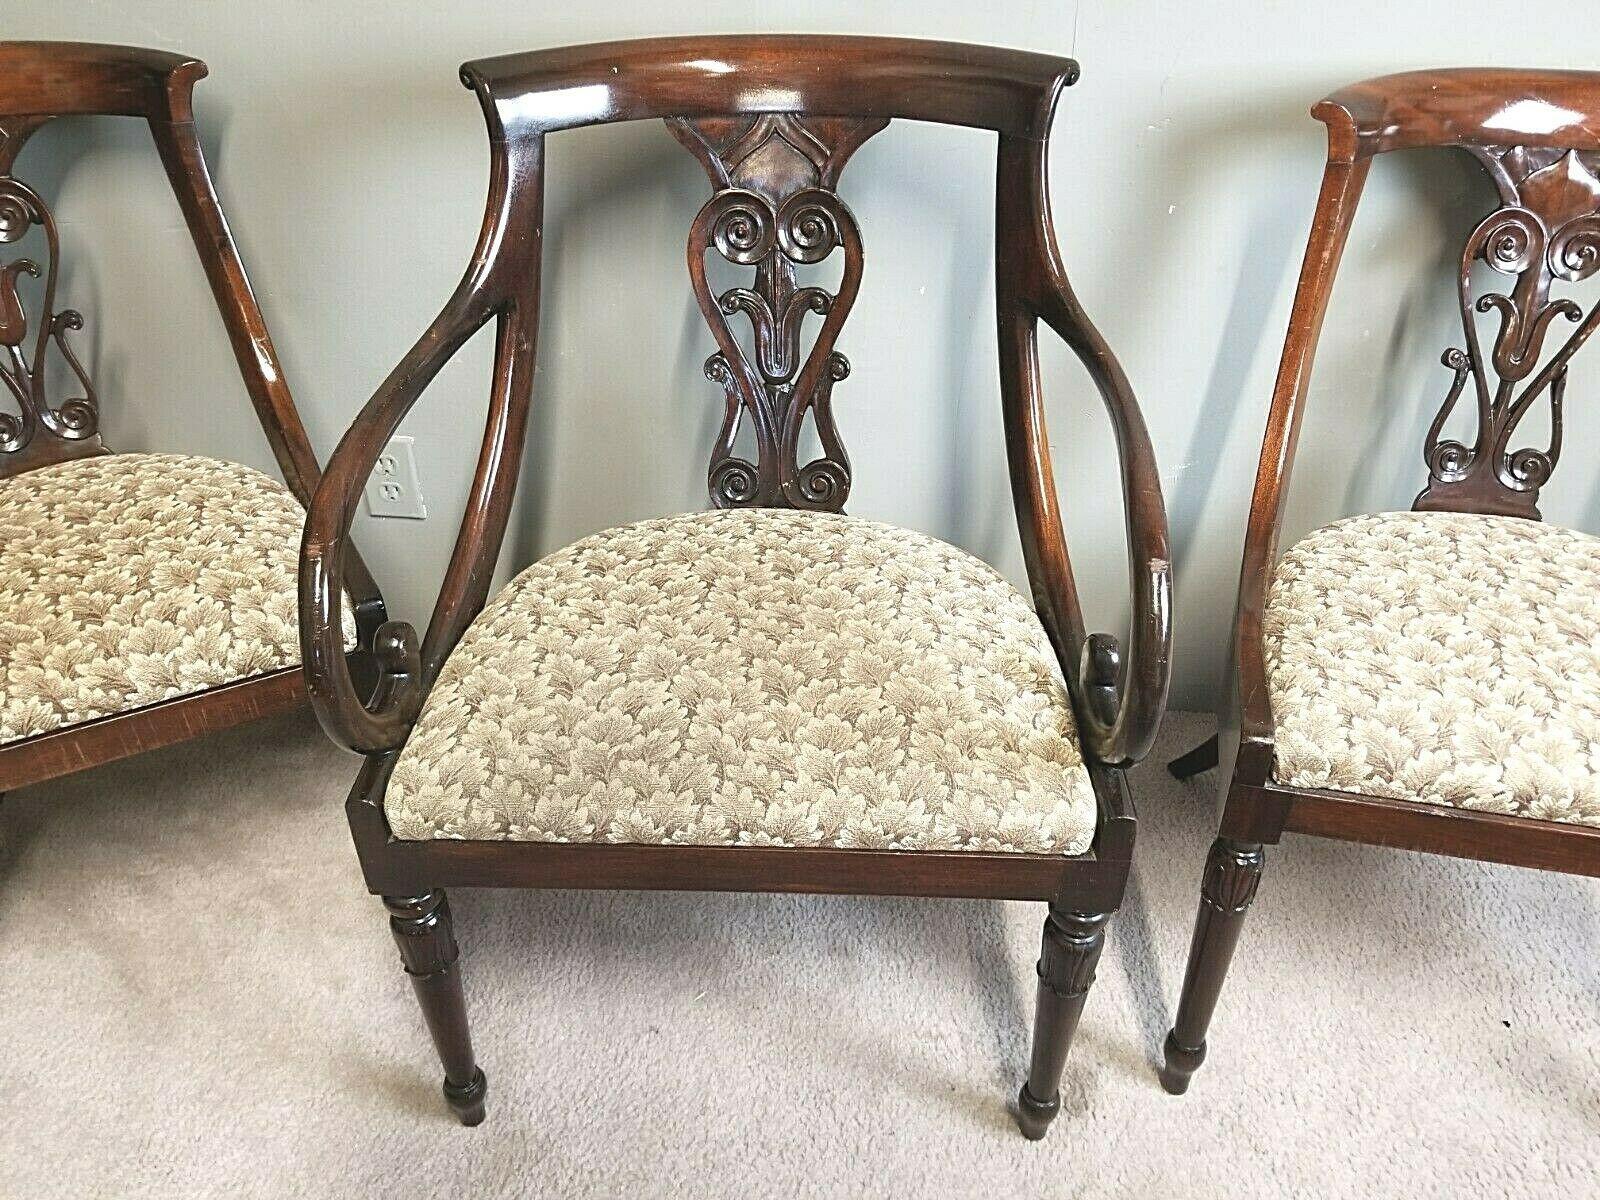 Offering one of our recent Palm Beach Estate fine furniture acquisitions of a
set of 5 antique English regency solid mahogany scroll arm dining chairs.

1890s Antique Hollywood Regency-style dining chairs feature solid mahogany wood frames